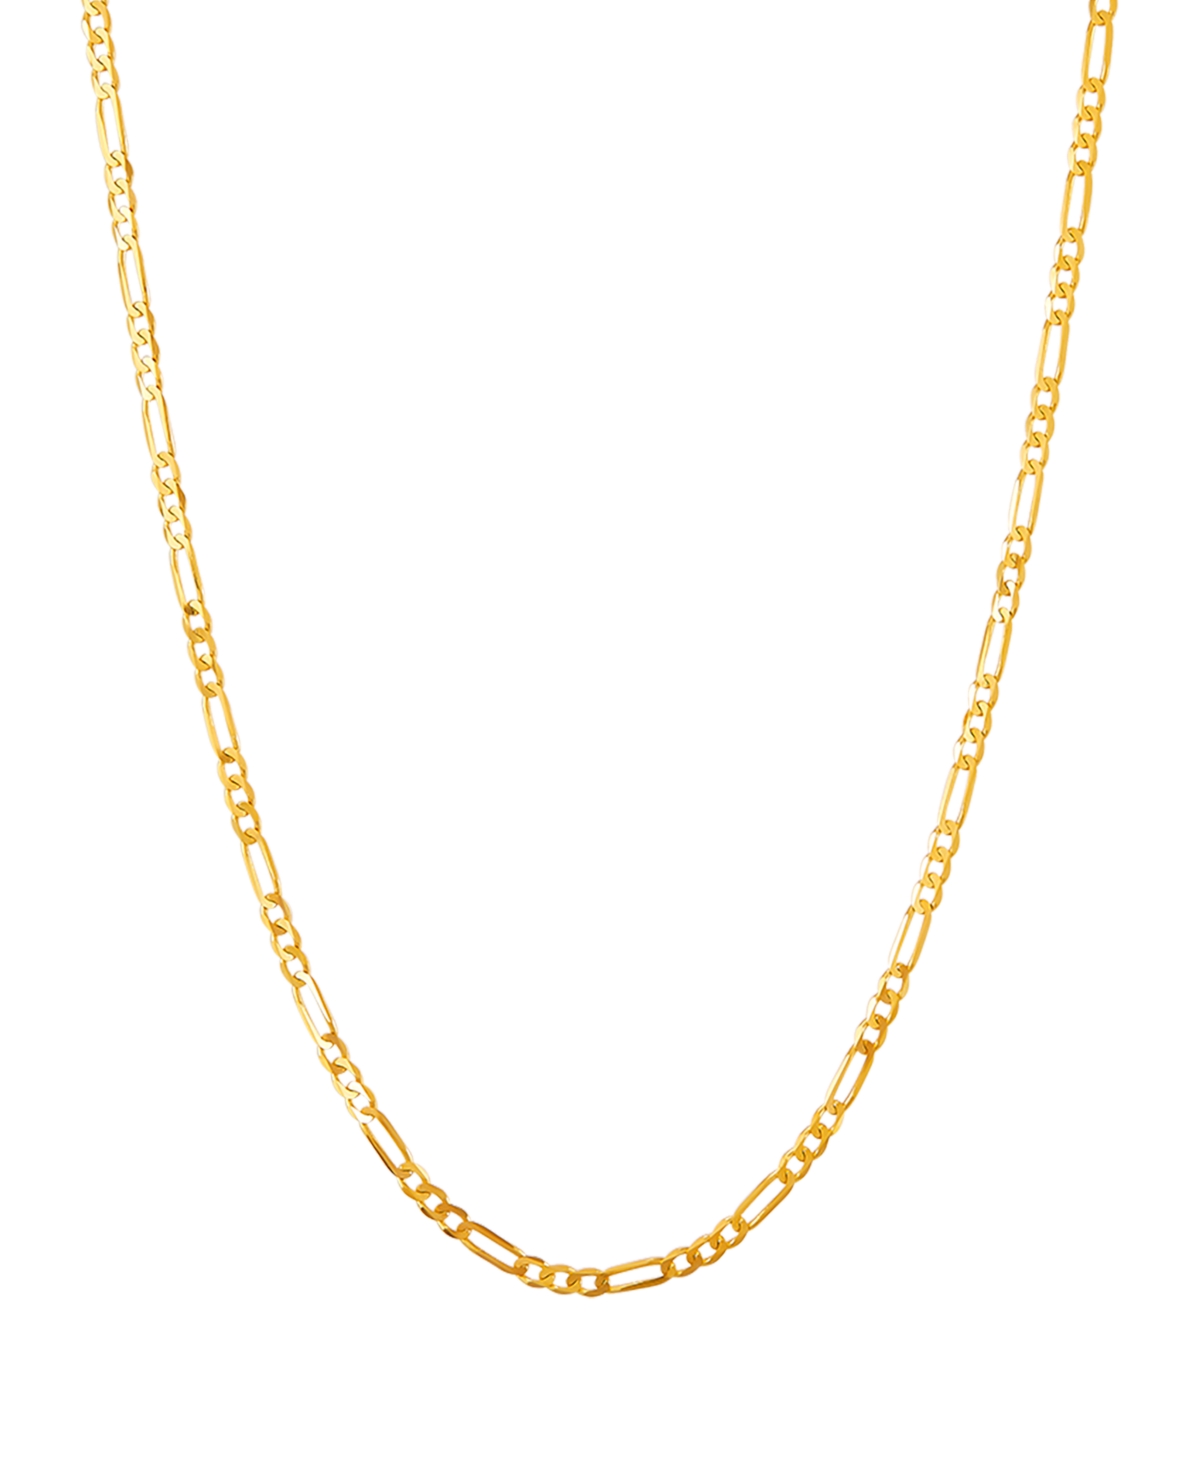 ITALIAN GOLD POLISHED 22" FIGARO CHAIN (1.85MM) IN 10K YELLOW GOLD